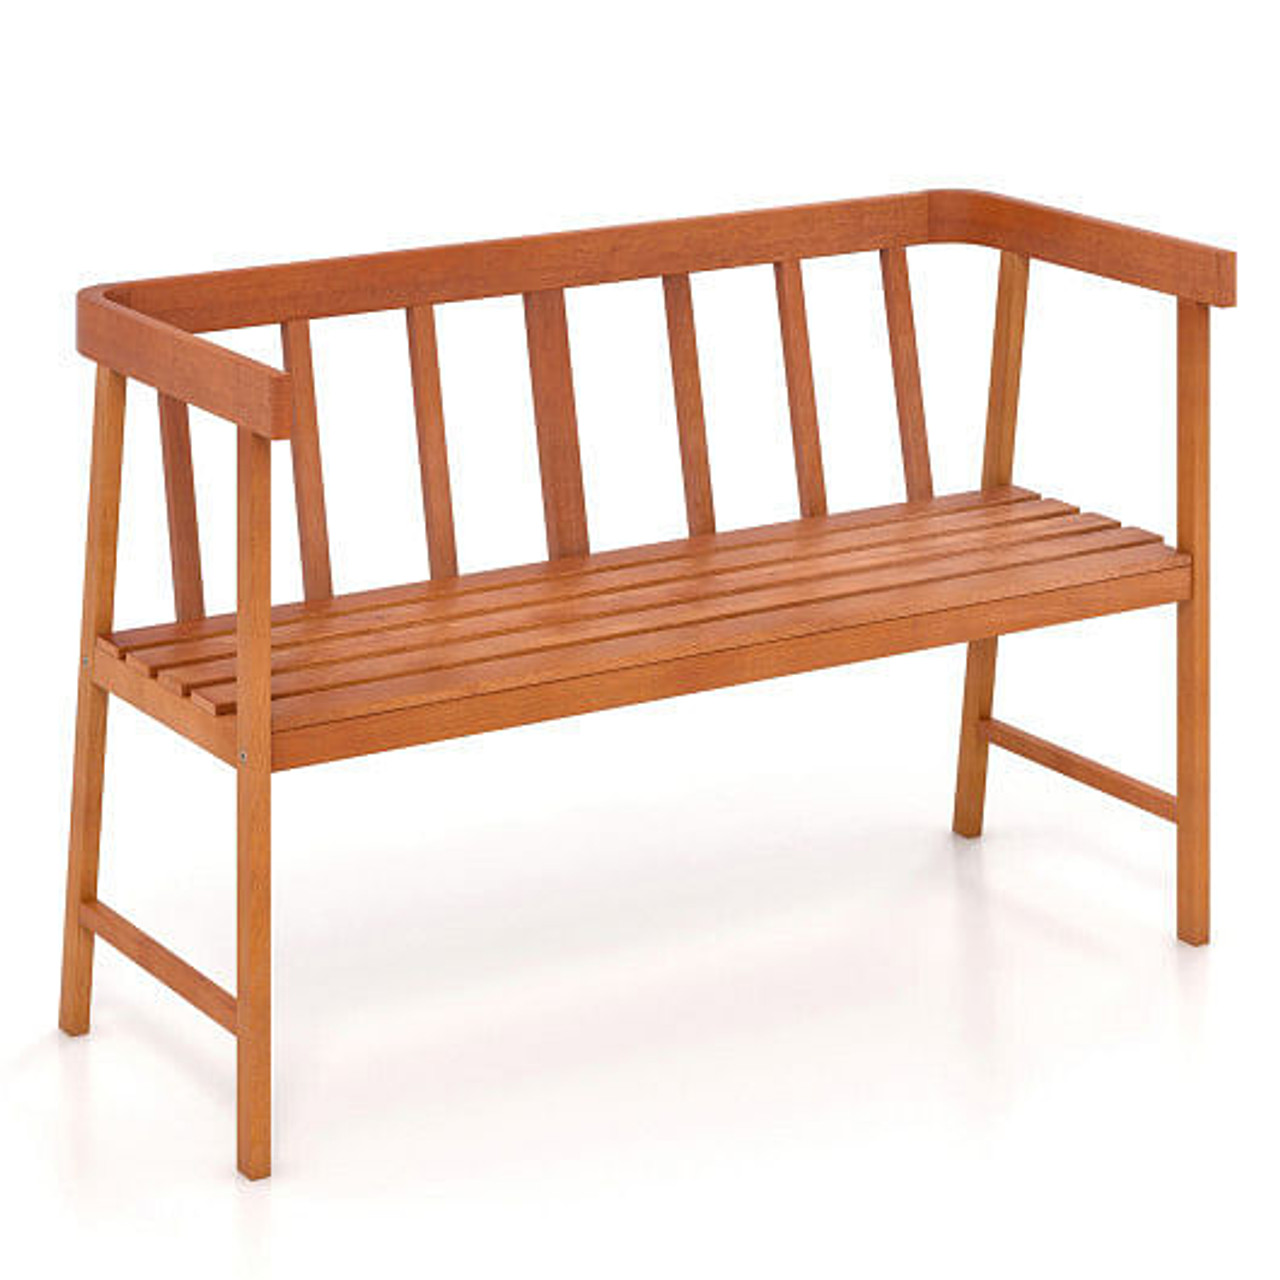 Outdoor Acacia Wood Bench with Backrest and Armrests